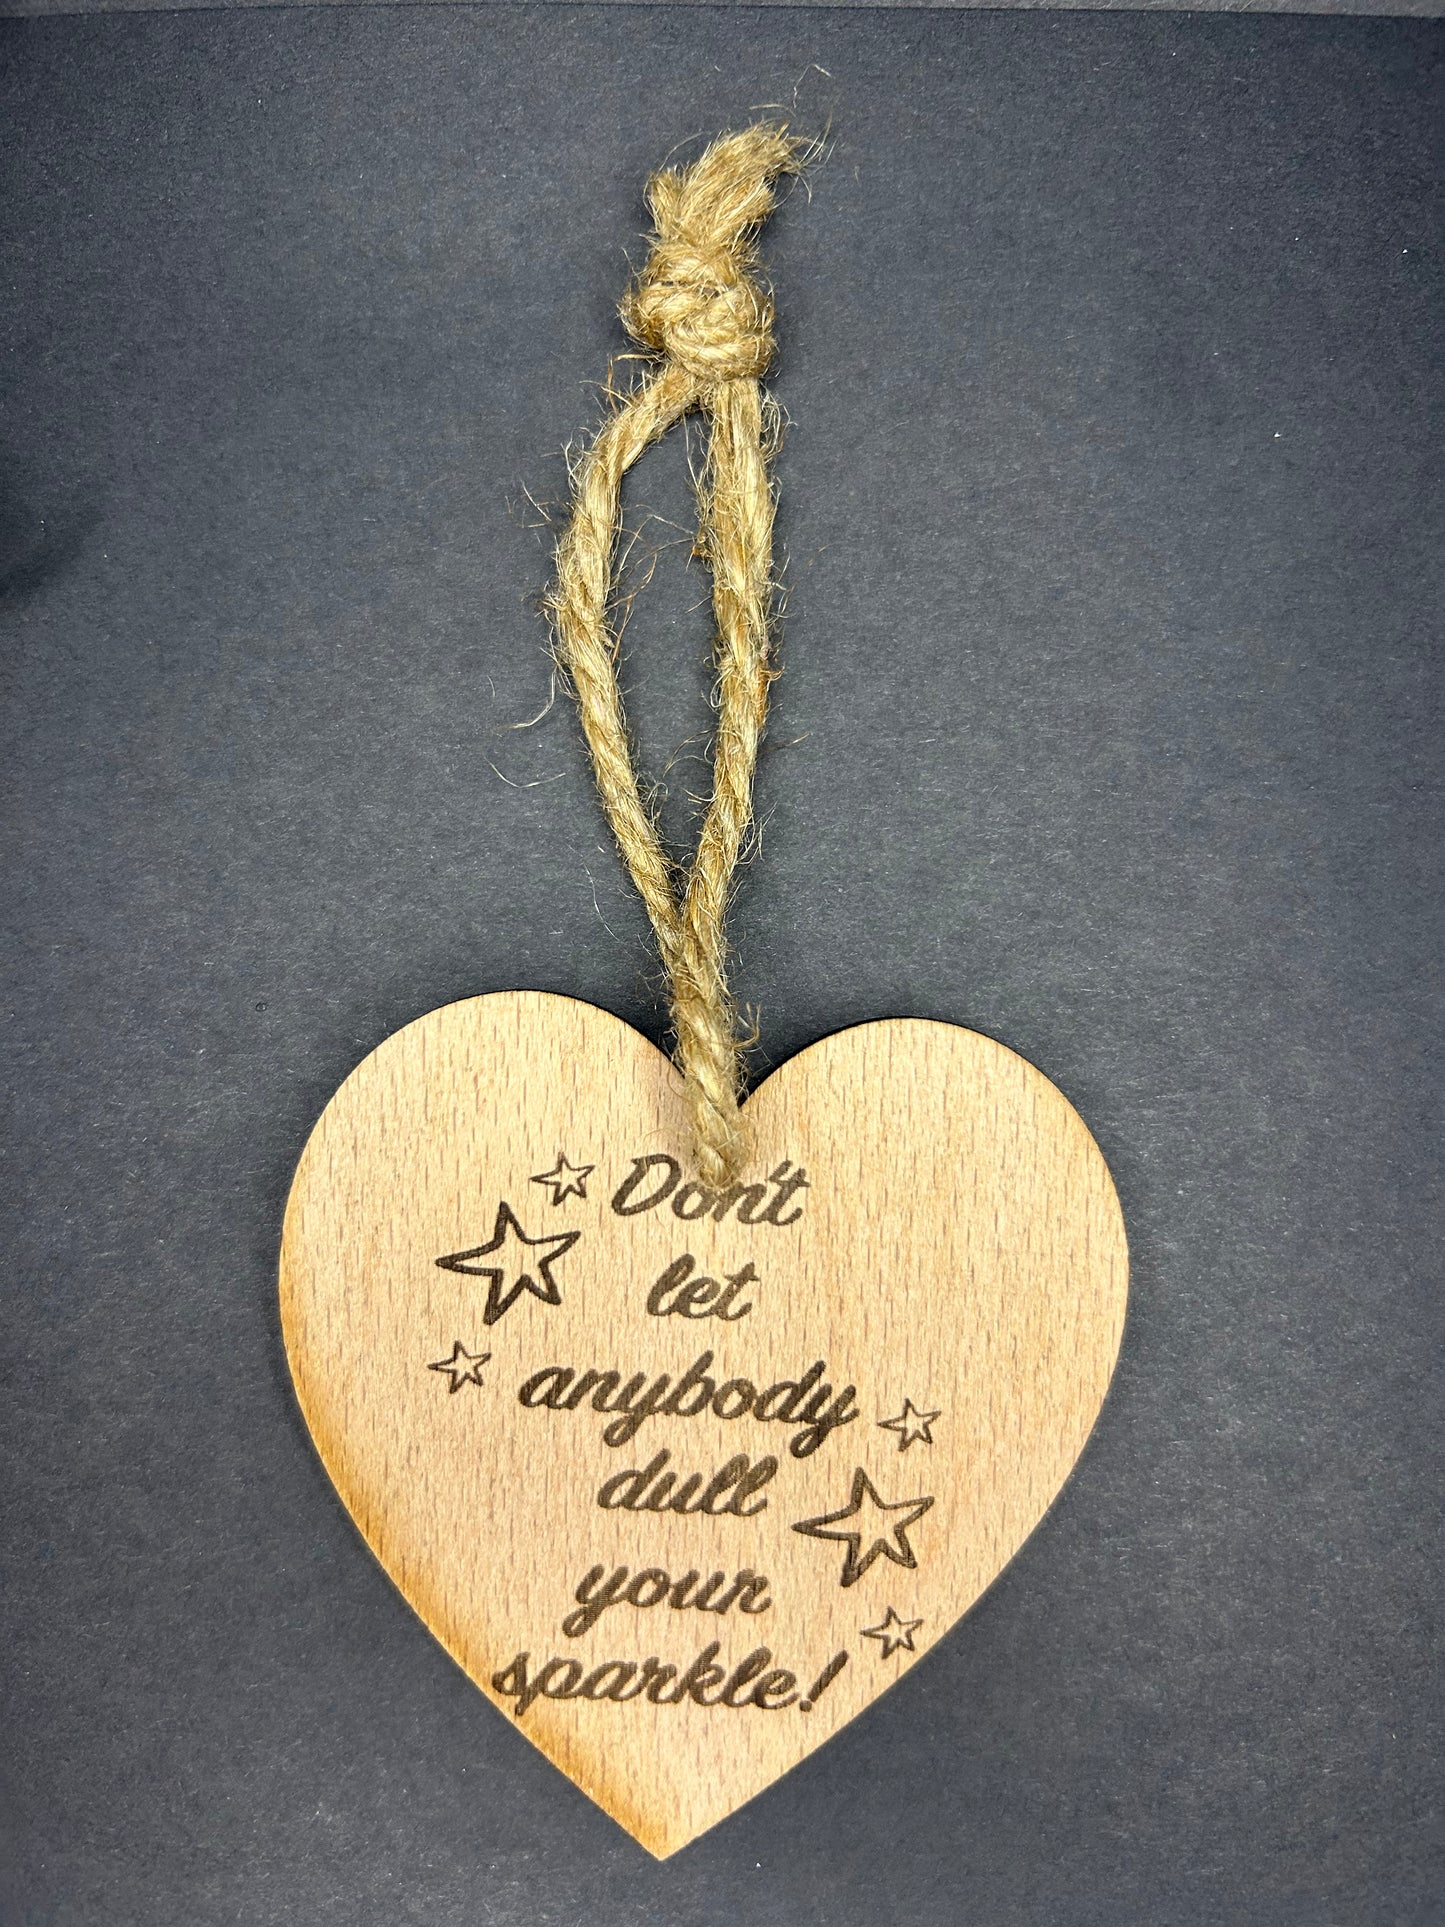 Don’t let anybody dull your sparkle plaque